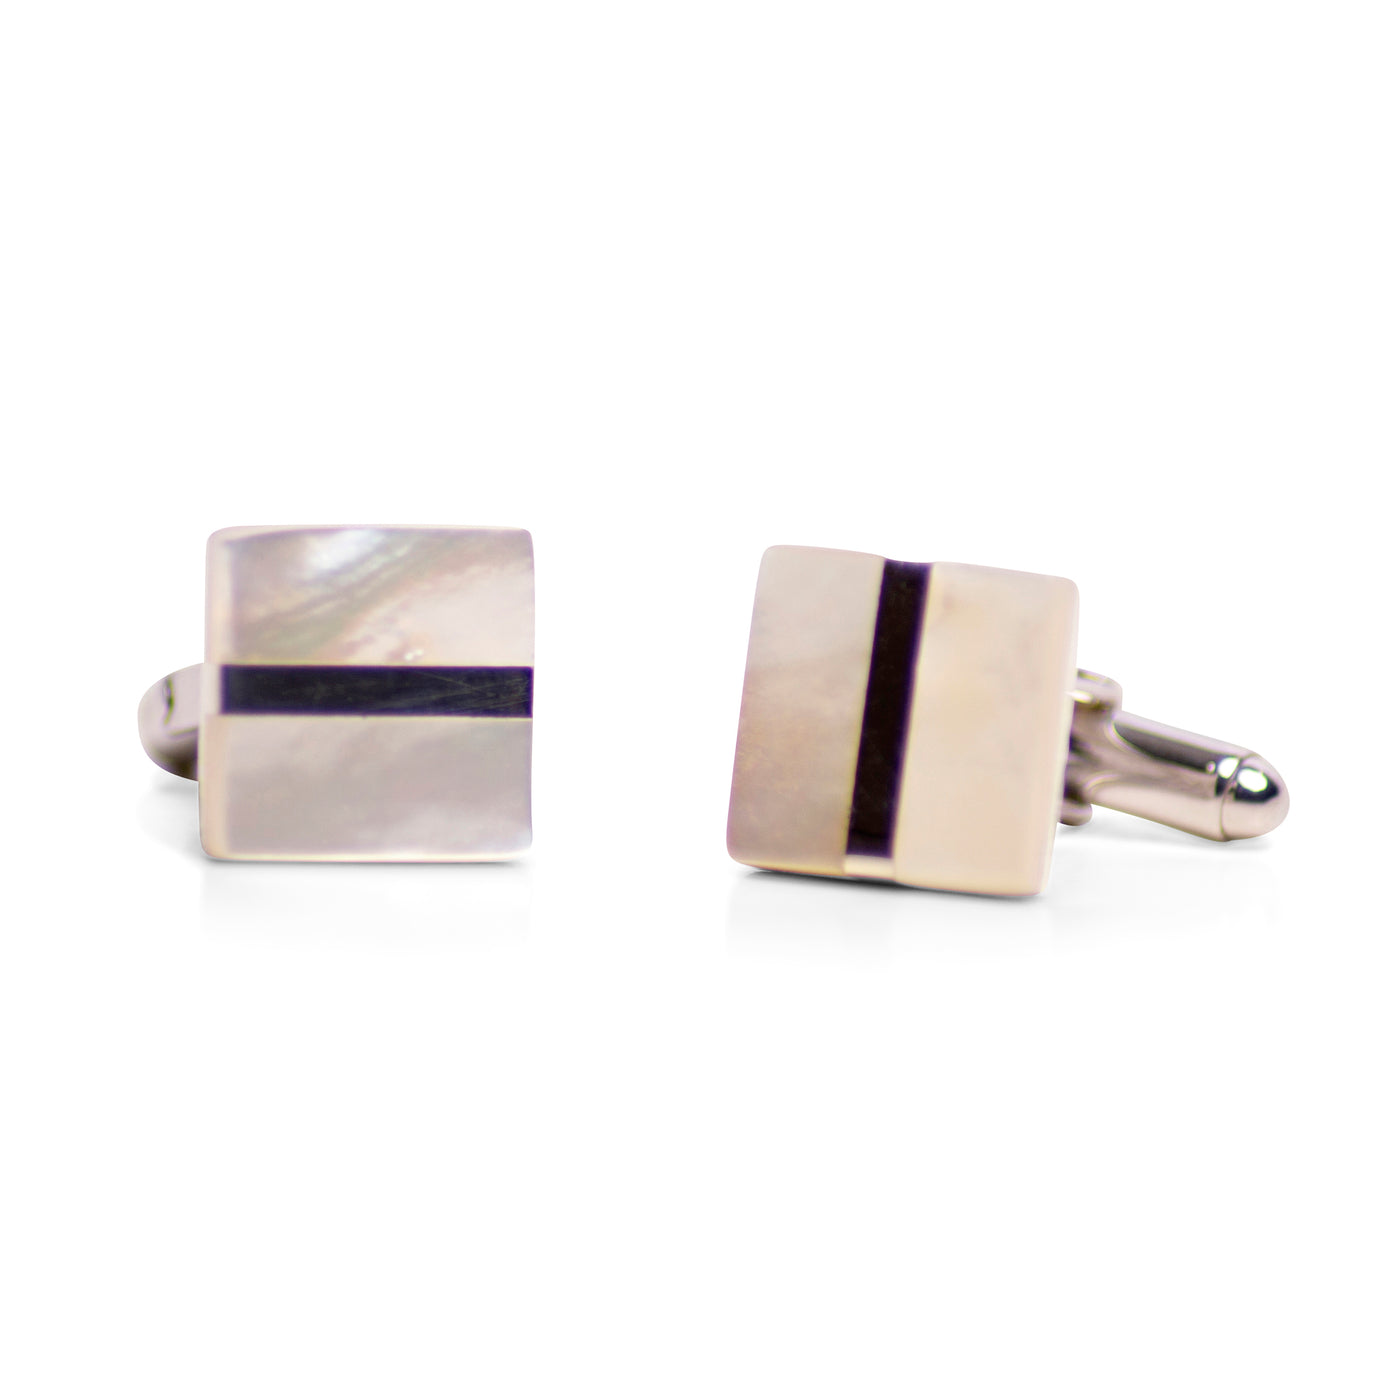 Square Mother of Pearl & Sterling Silver Cufflinks | SilverAndGold